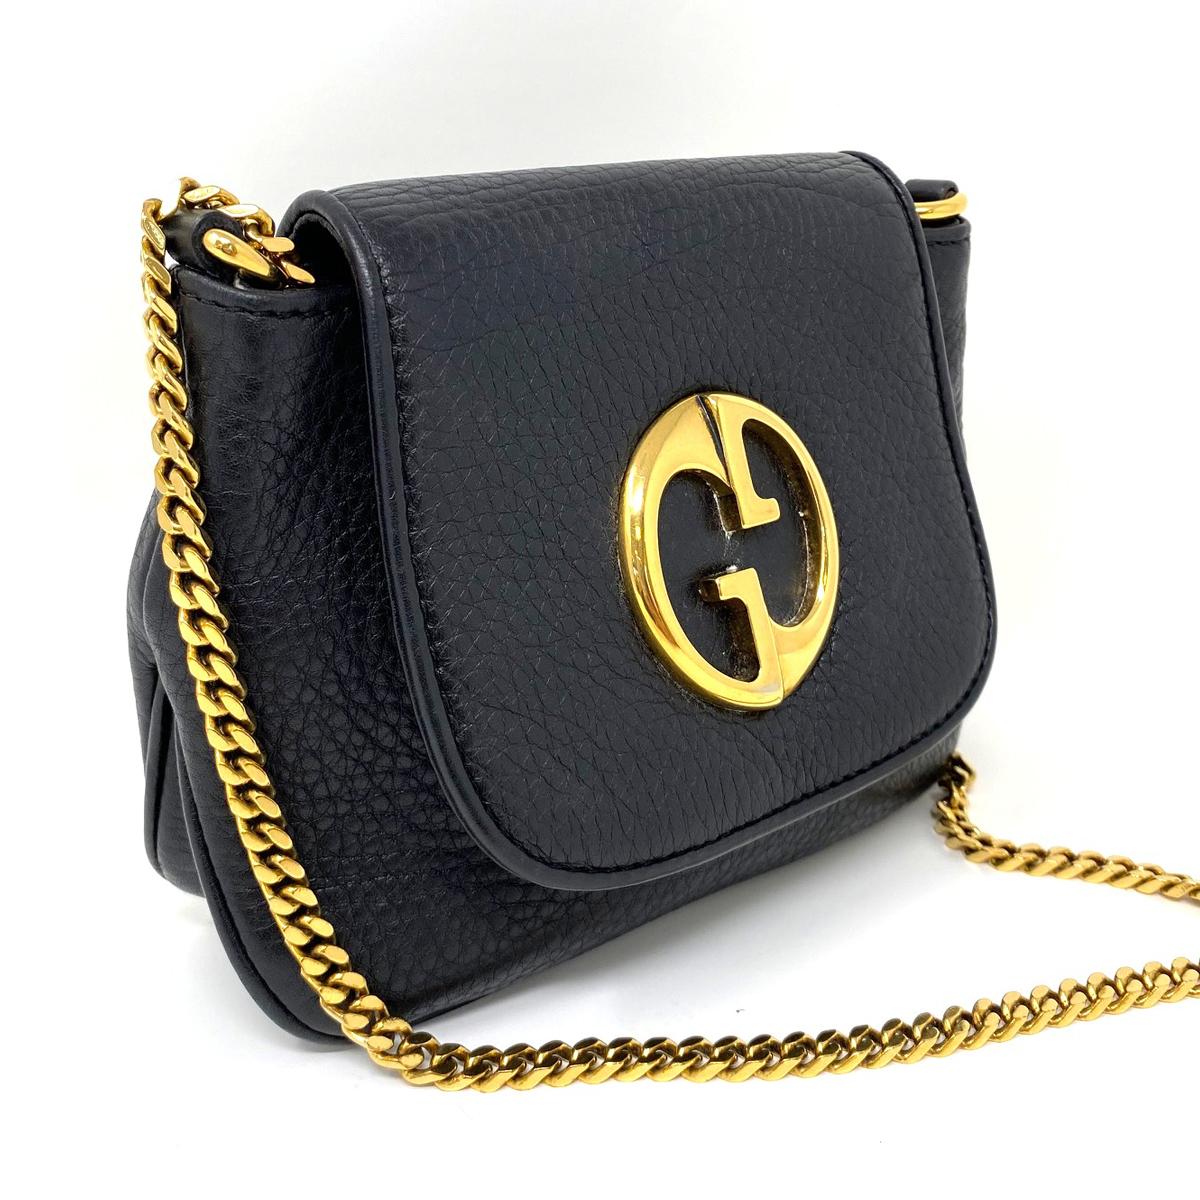 Company-Gucci 
Style-1973 Small GHW Black Pebbled Leather Crossbody Bag 
Outside-No rips tears or marks on bag exterior  
Inside-No rips, tear or stains
Pockets-1 pocket inside bag 
Handles/ Straps-25